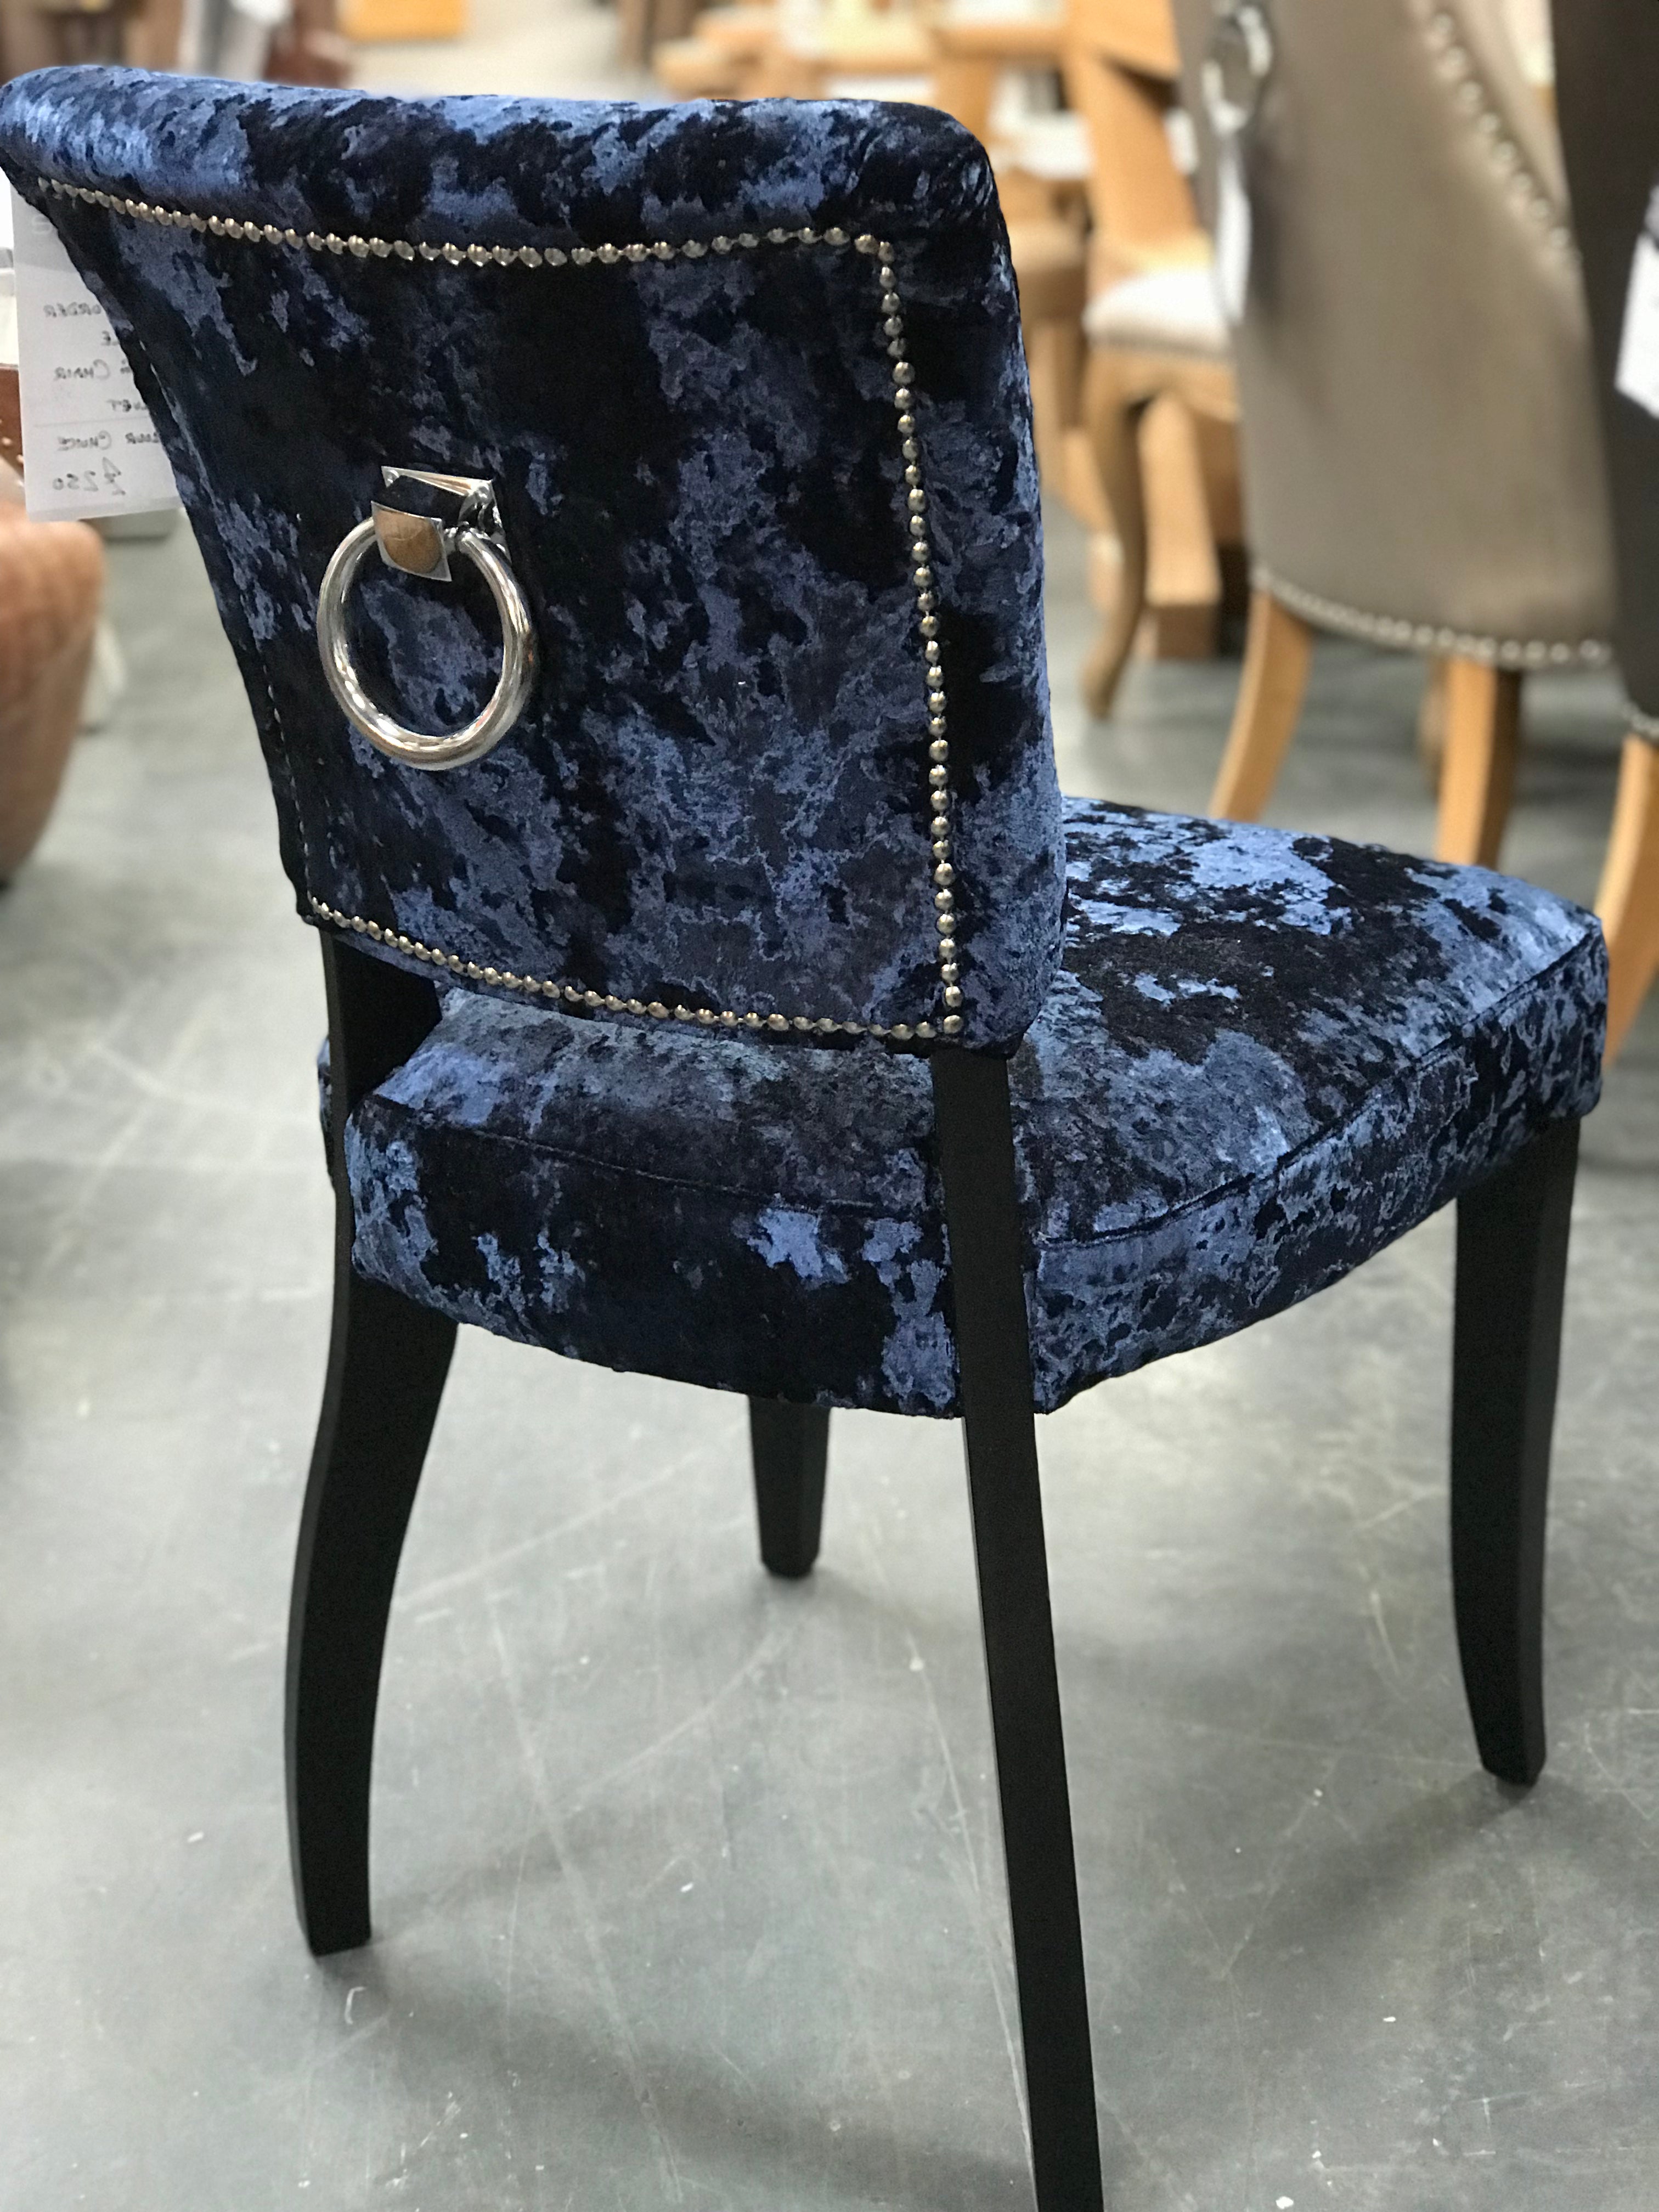 Mimi Knocker Dining Chairs from Top Secret Furniture